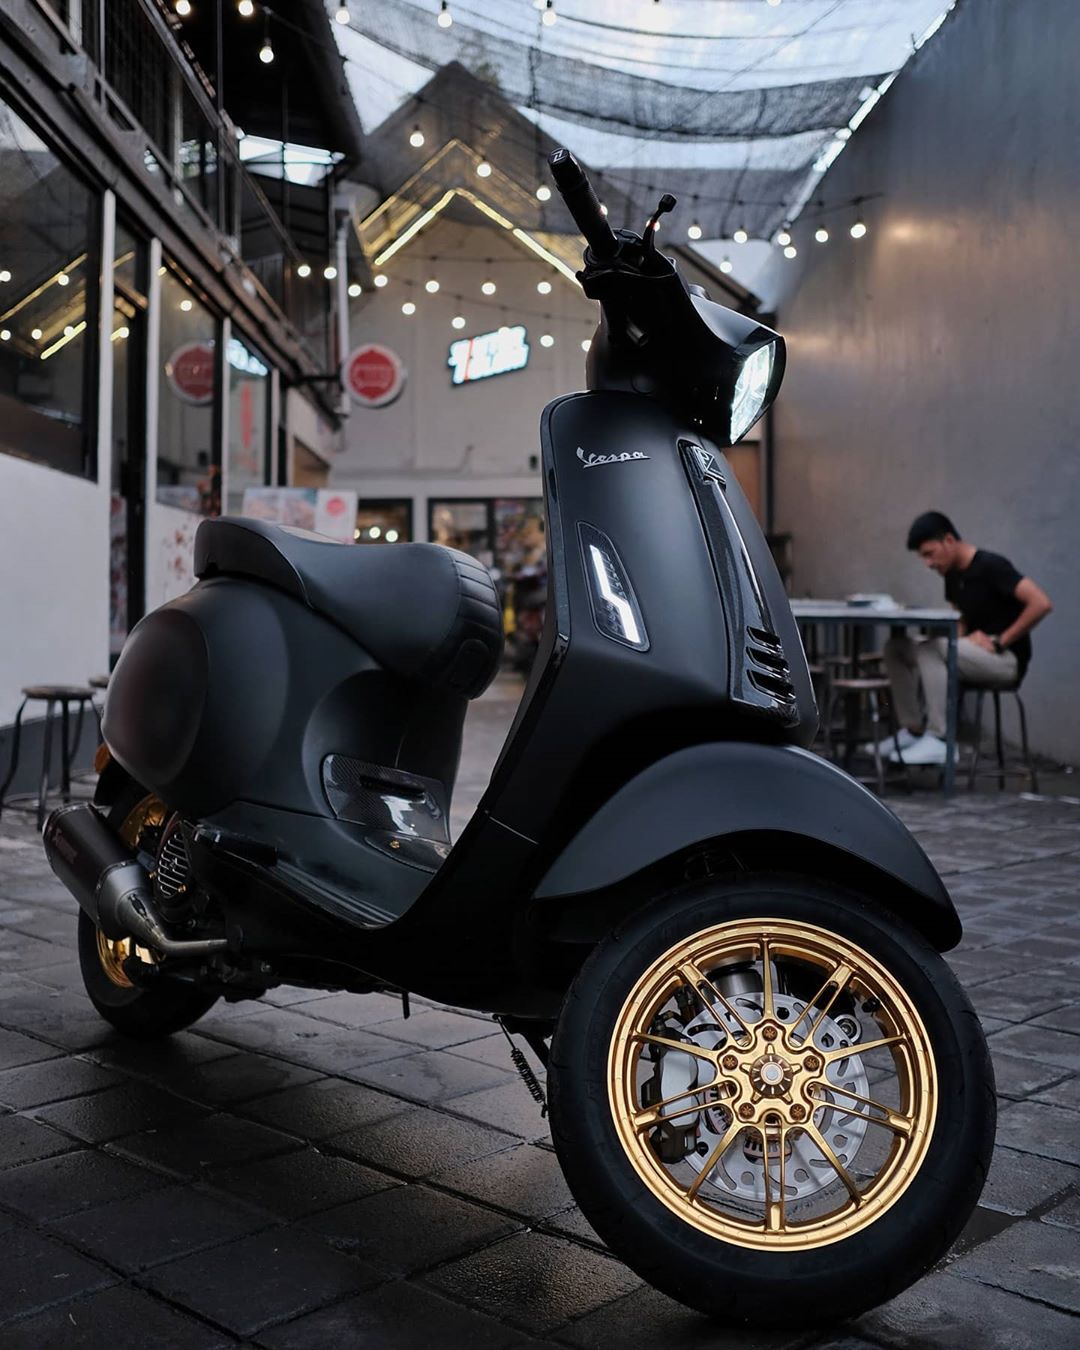 matte black motor scooter with gold rims photo by Instagram user @skuterkoloni